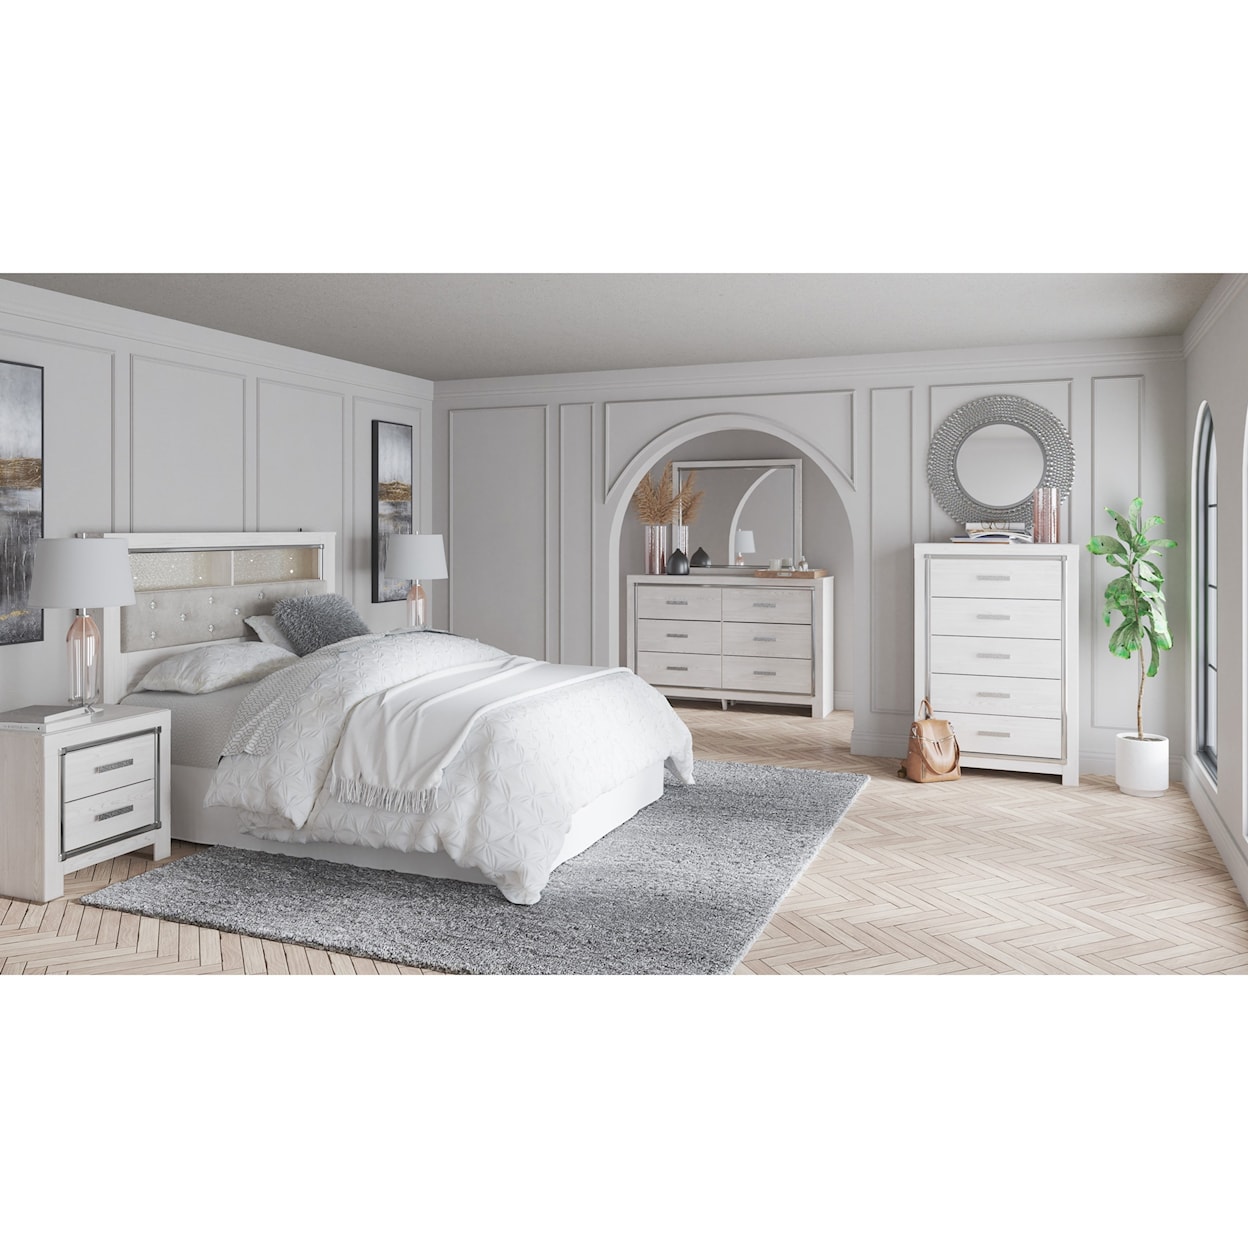 Ashley Signature Design Altyra Queen Bedroom Group